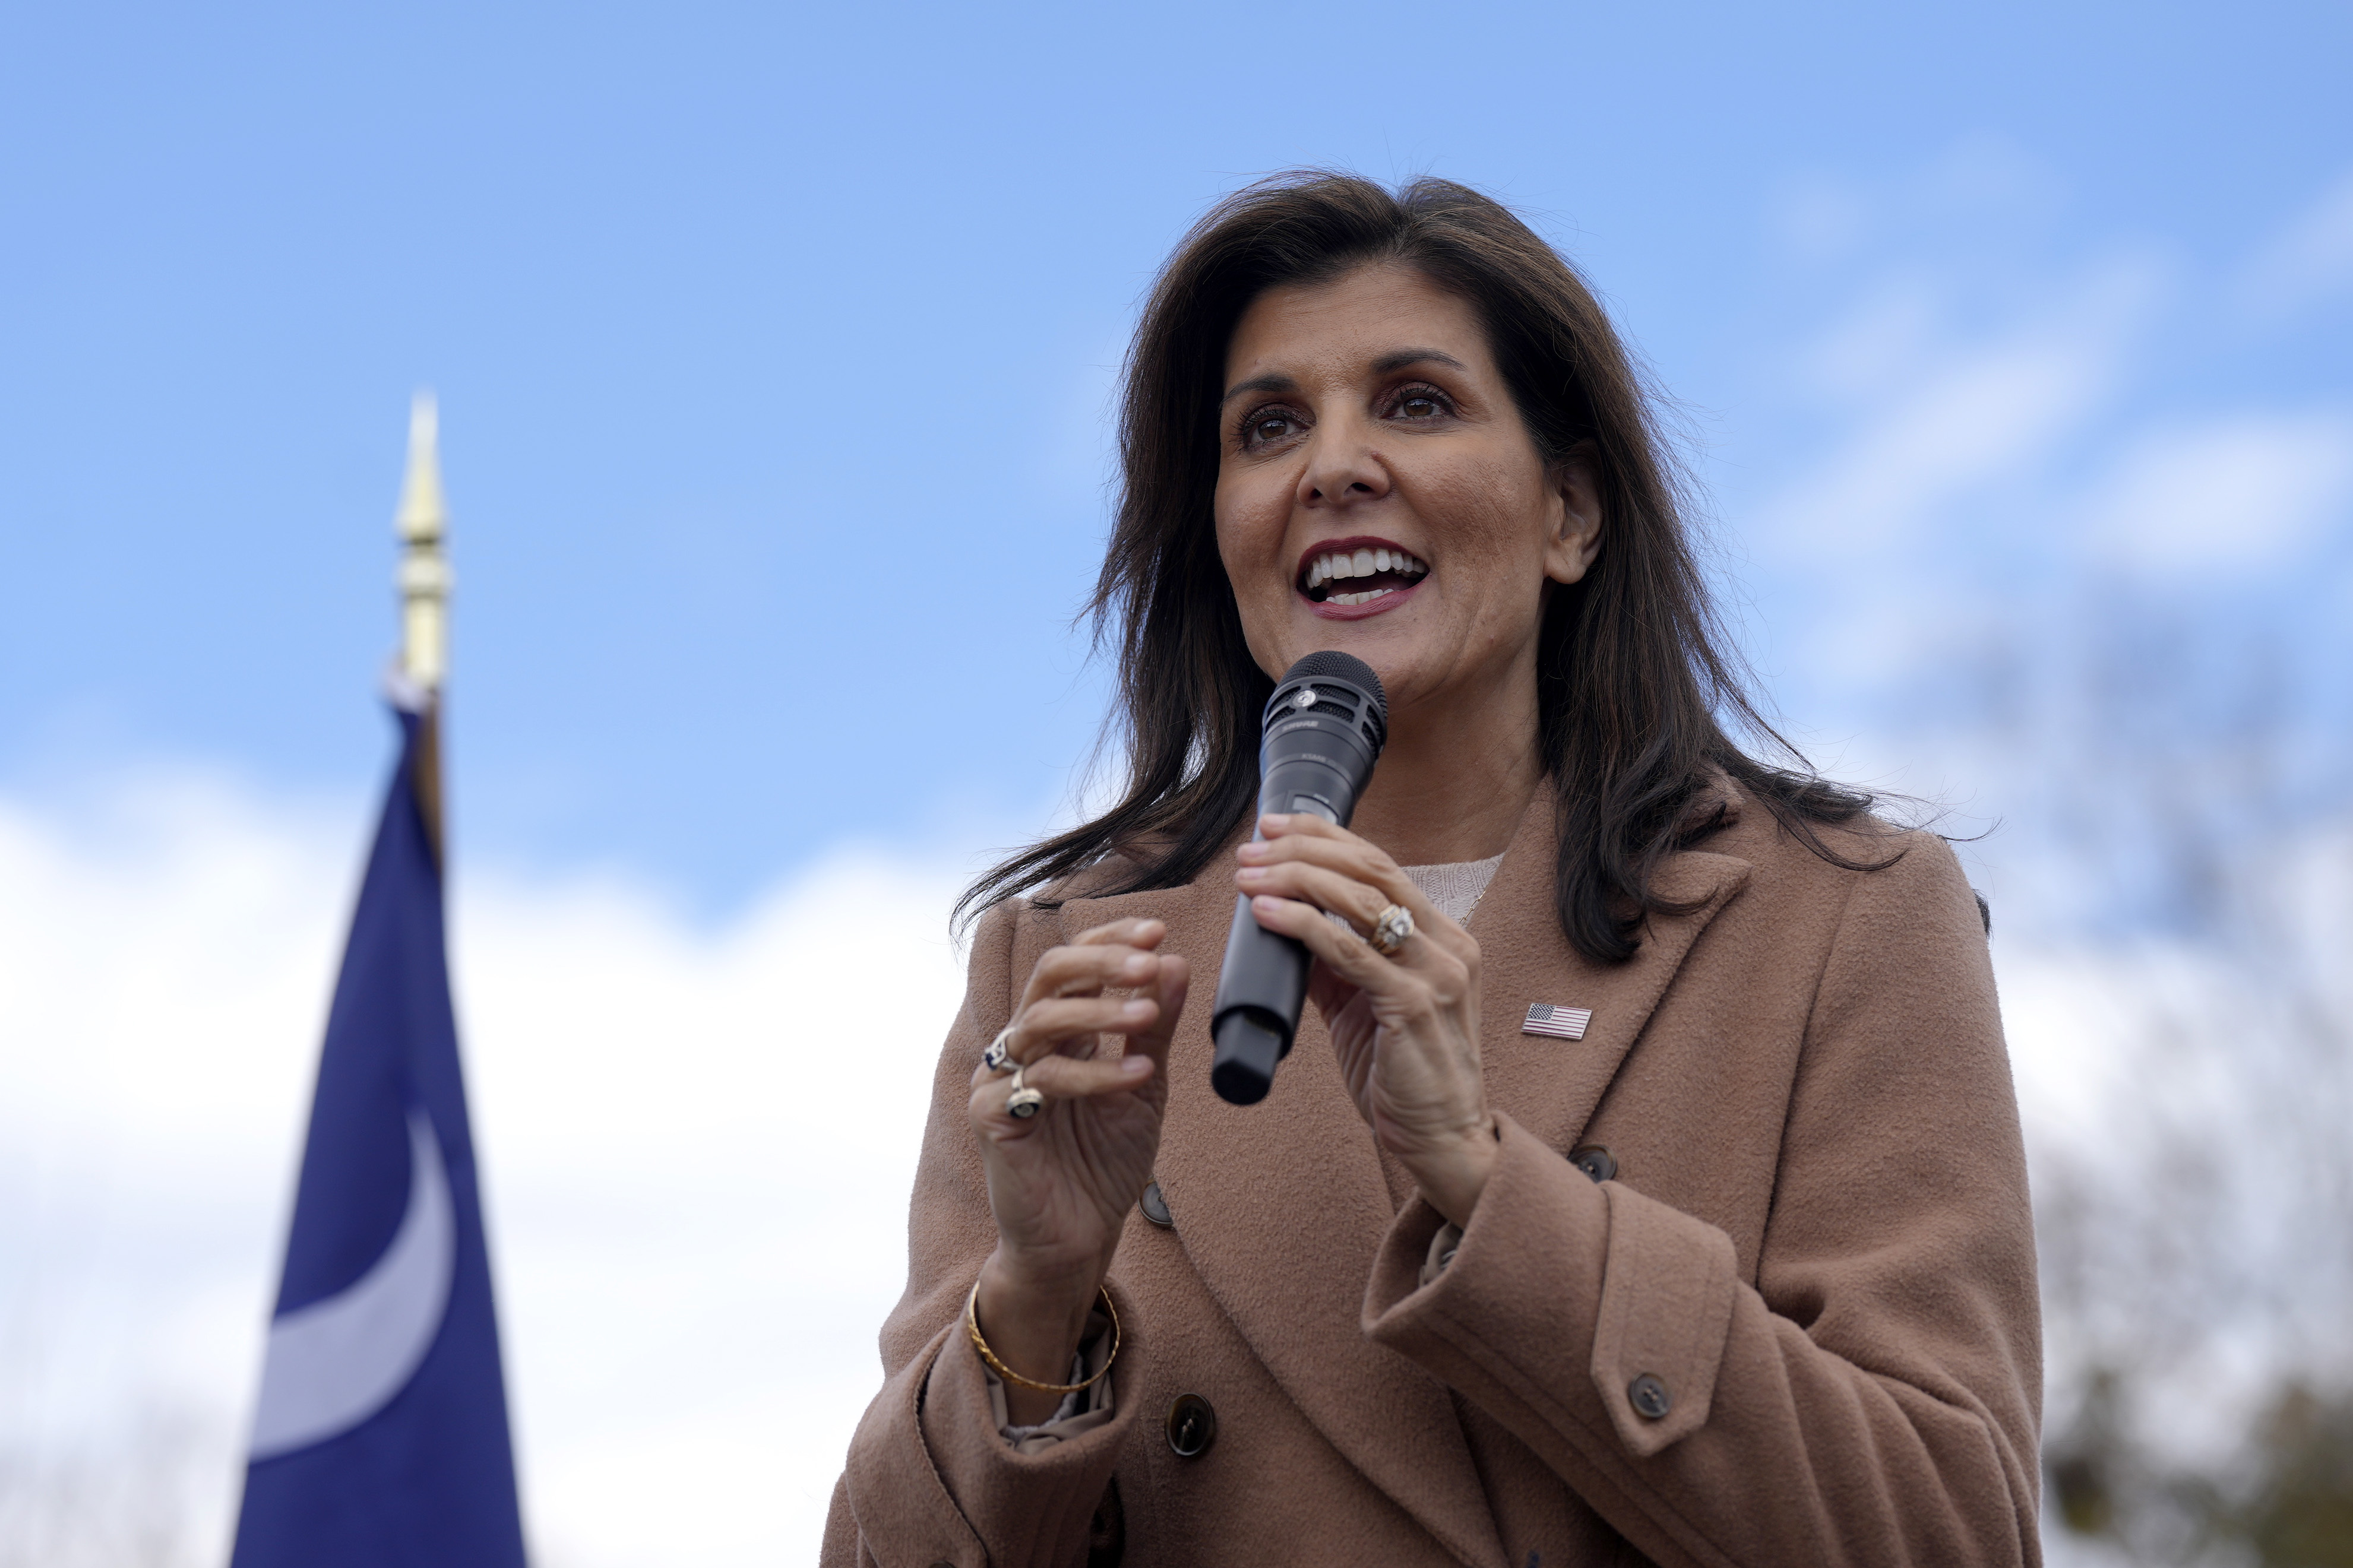 Nikki Haley is sharpening contrasts with Donald Trump in the South Carolina primary's closing days